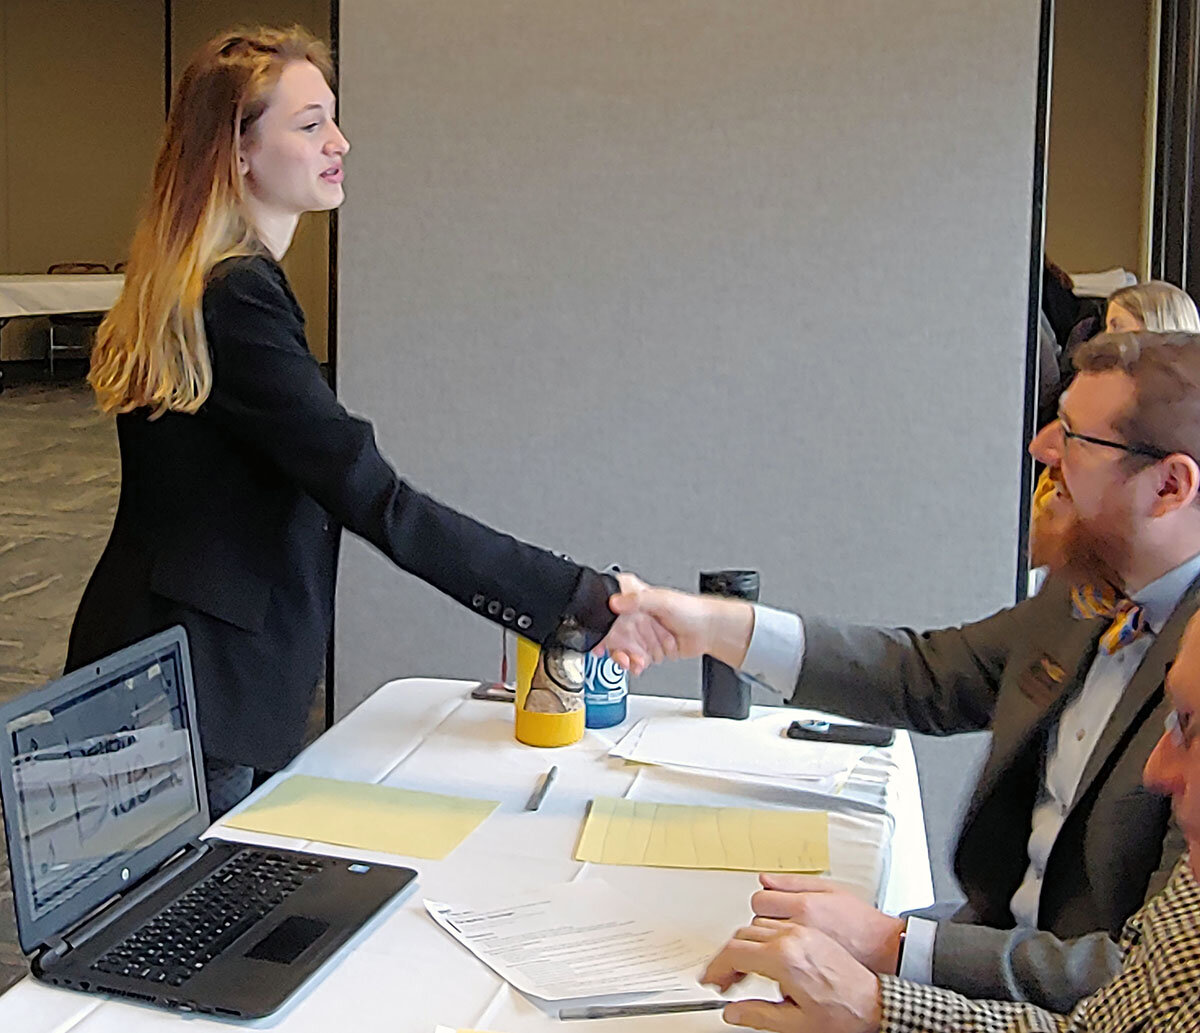  Charlize Byrne, a sophomore at Bonanza, shakes hands with the judges following a presentation at the 2020 FBLA Cascade Regional Skills Conference Wednesday at Oregon Tech 